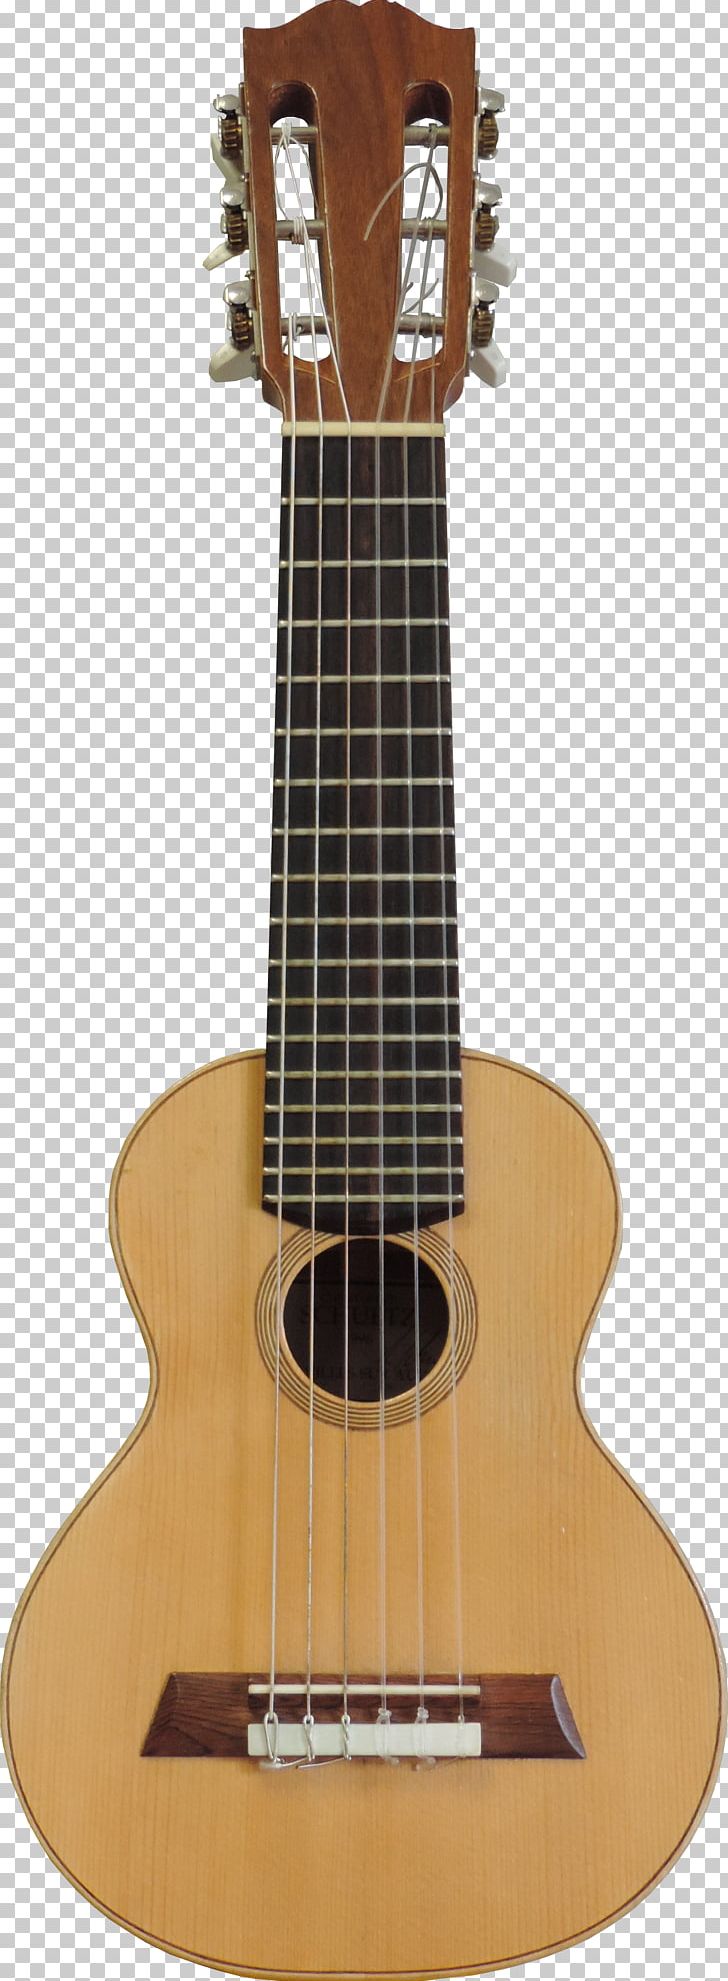 Acoustic Guitar Parlor Guitar Classical Guitar Dreadnought PNG, Clipart, Acoustic Electric Guitar, Classical Guitar, Cuatro, Guitar Accessory, Musical Instruments Free PNG Download